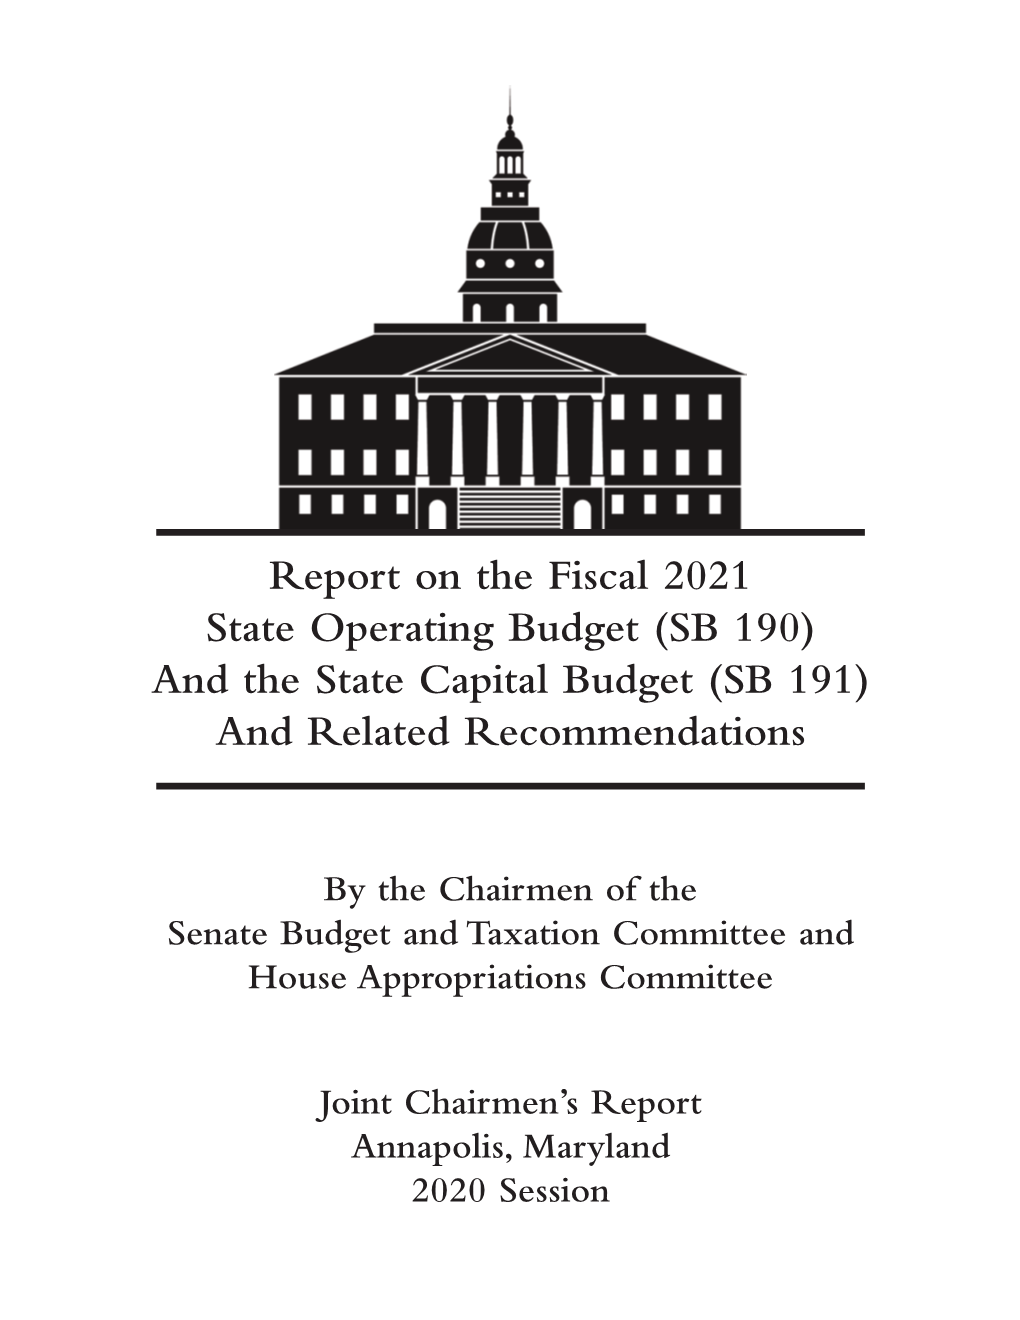 Report on the FY 2021 State Operating Budget